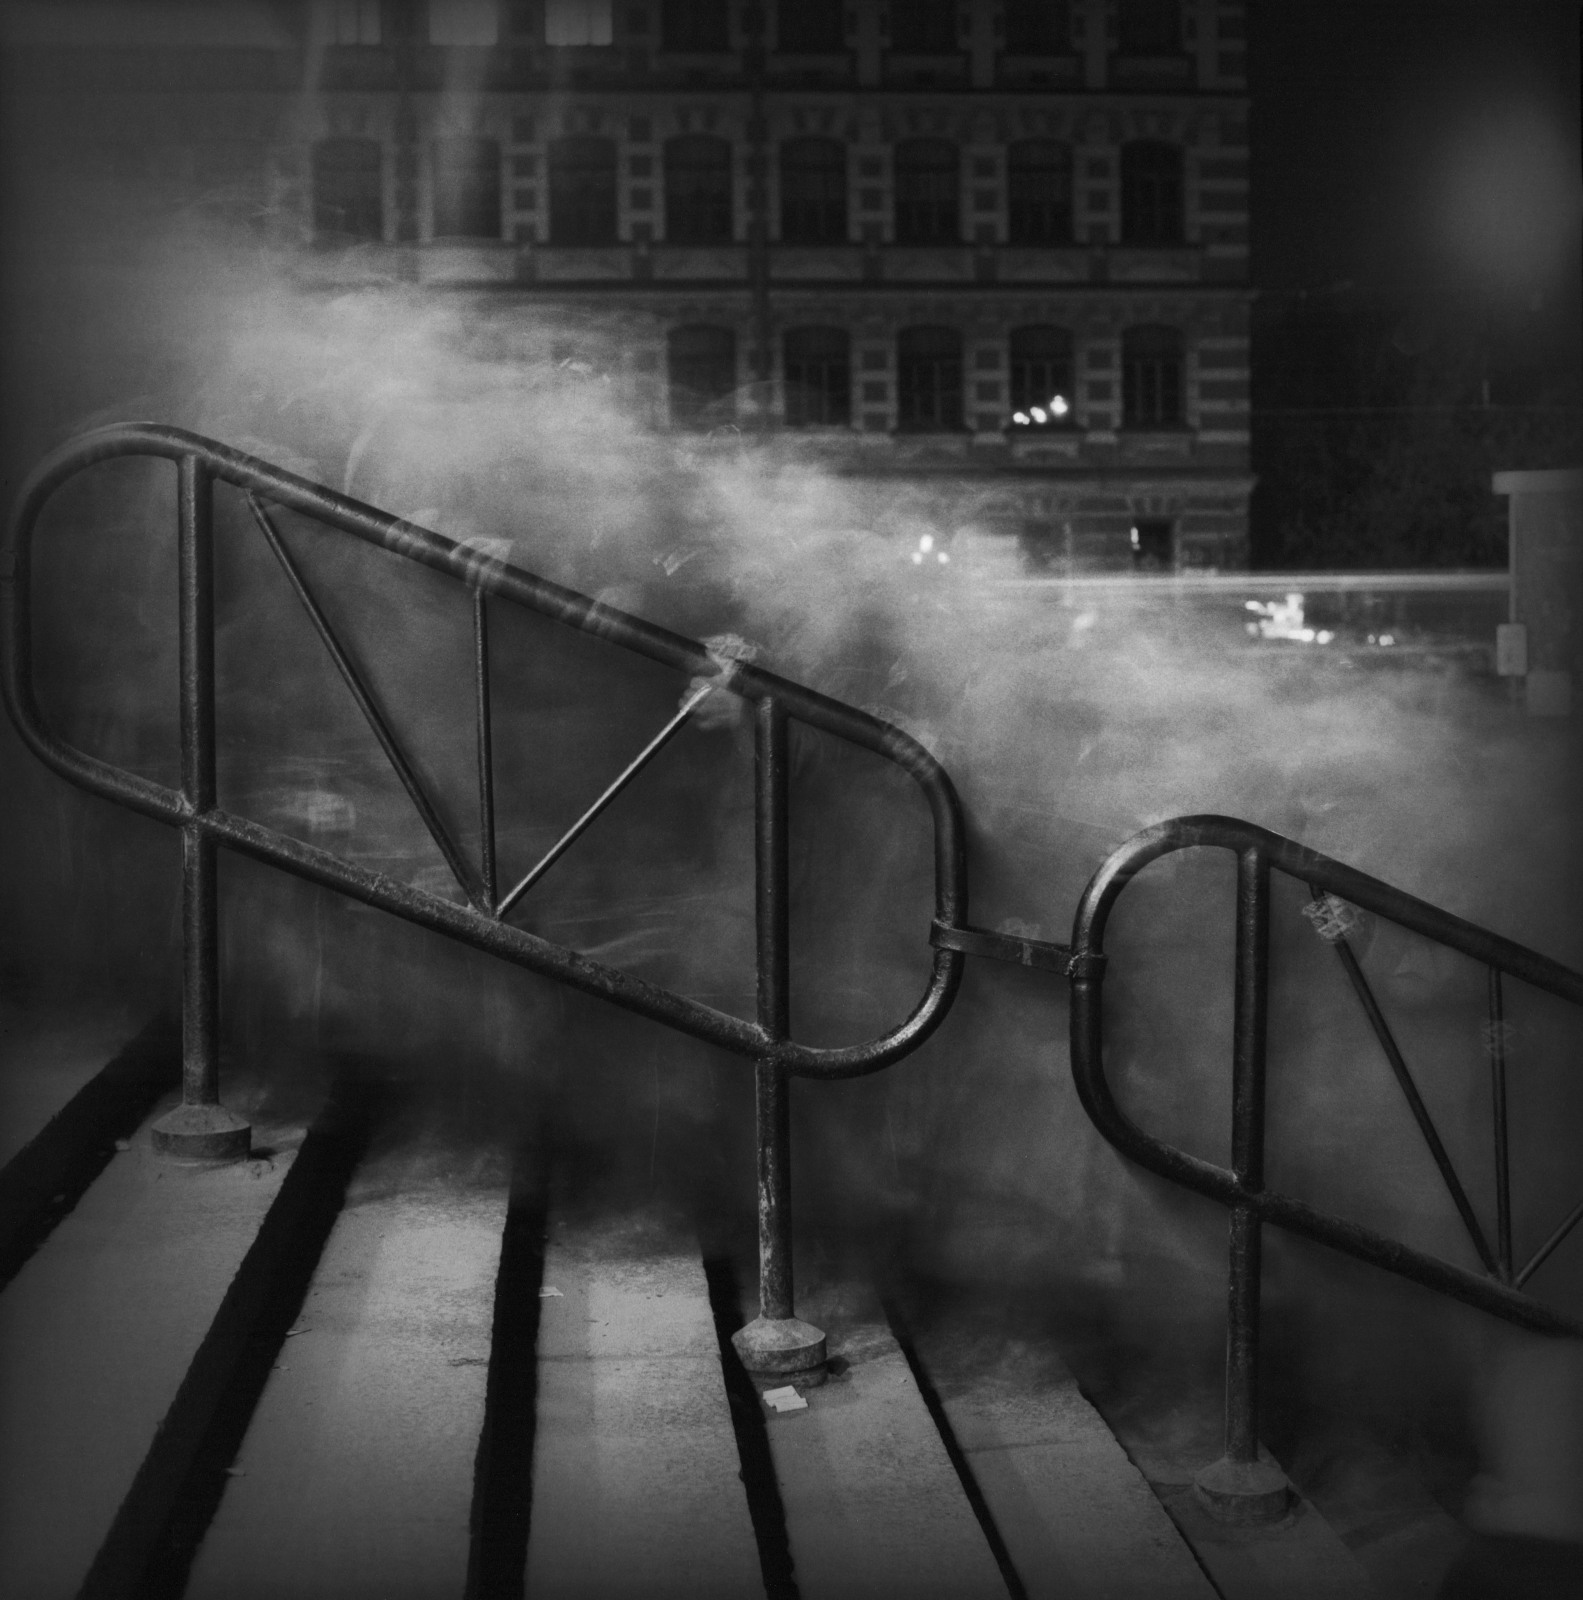 A time-lapse image of blurry figures going up a staircase at night in a black and white photo